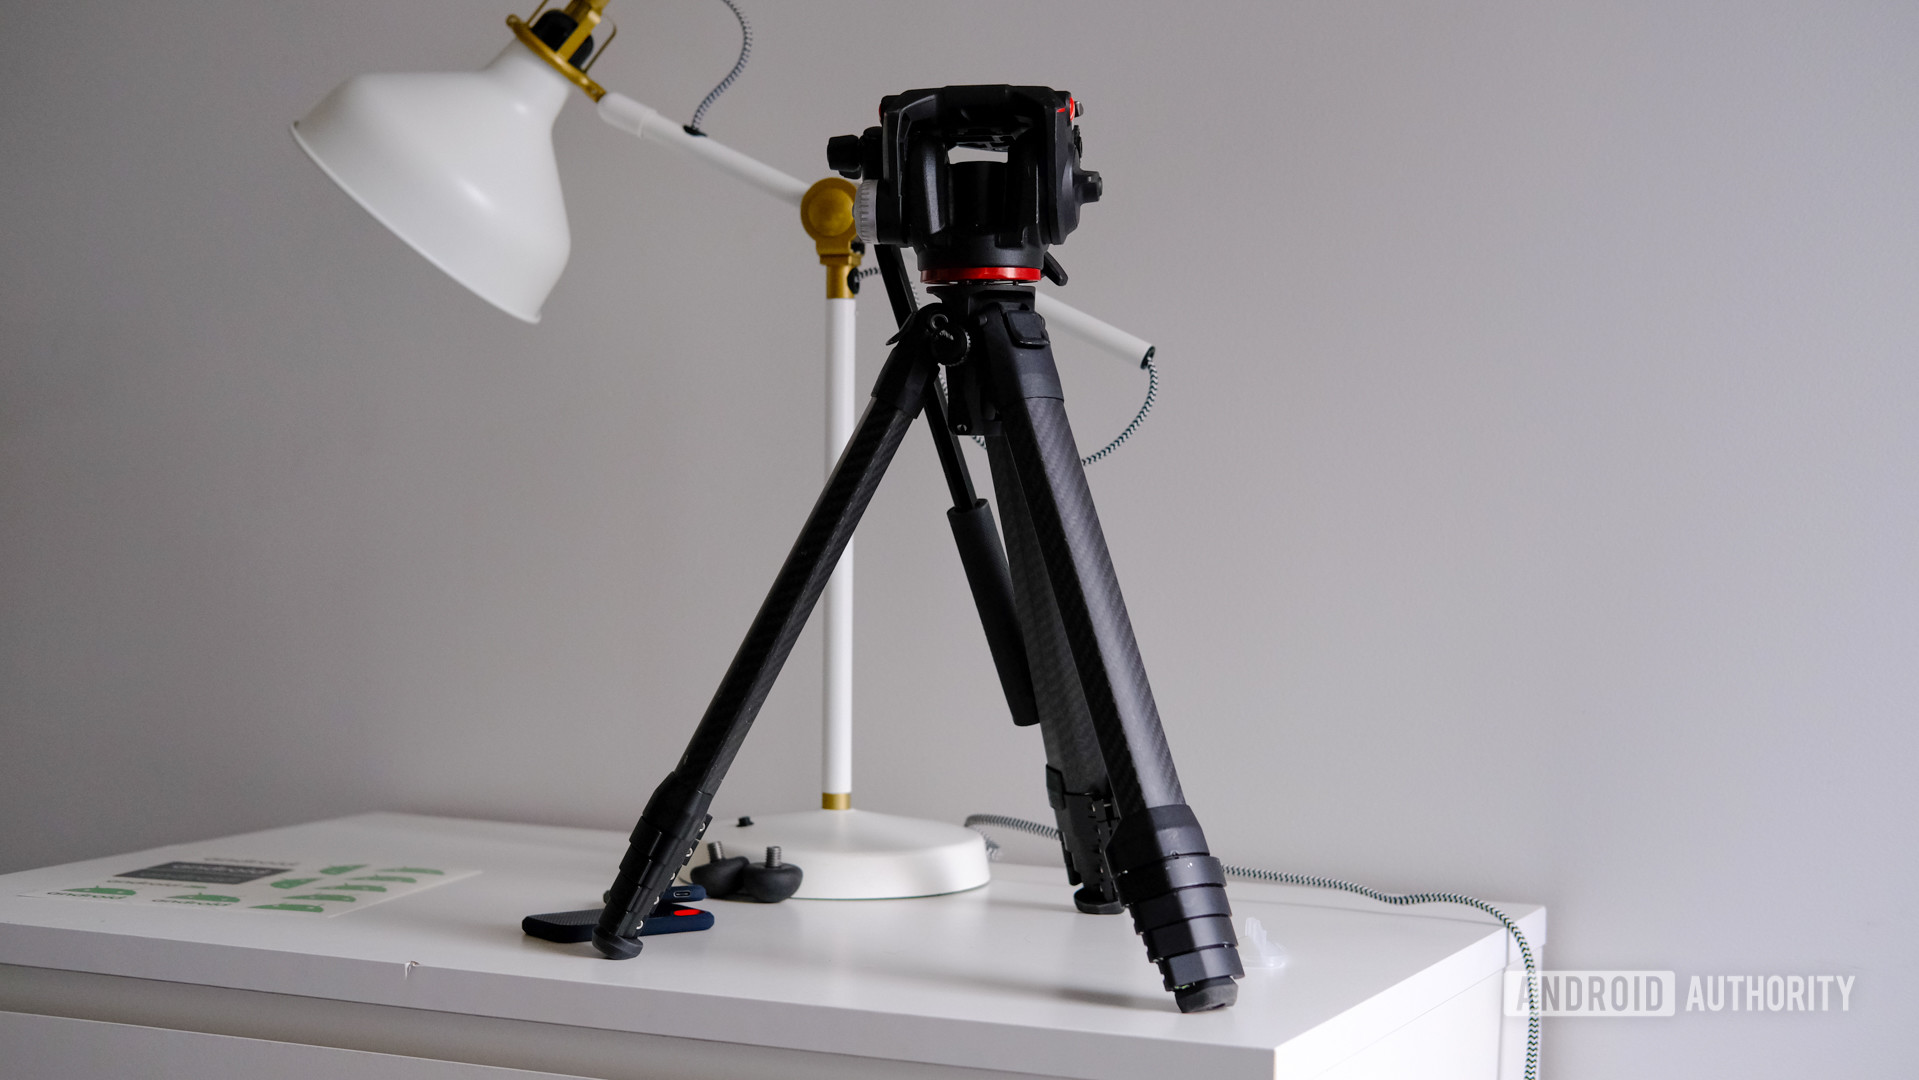 Peak Design Tripod and Manfroto XPRO head on table